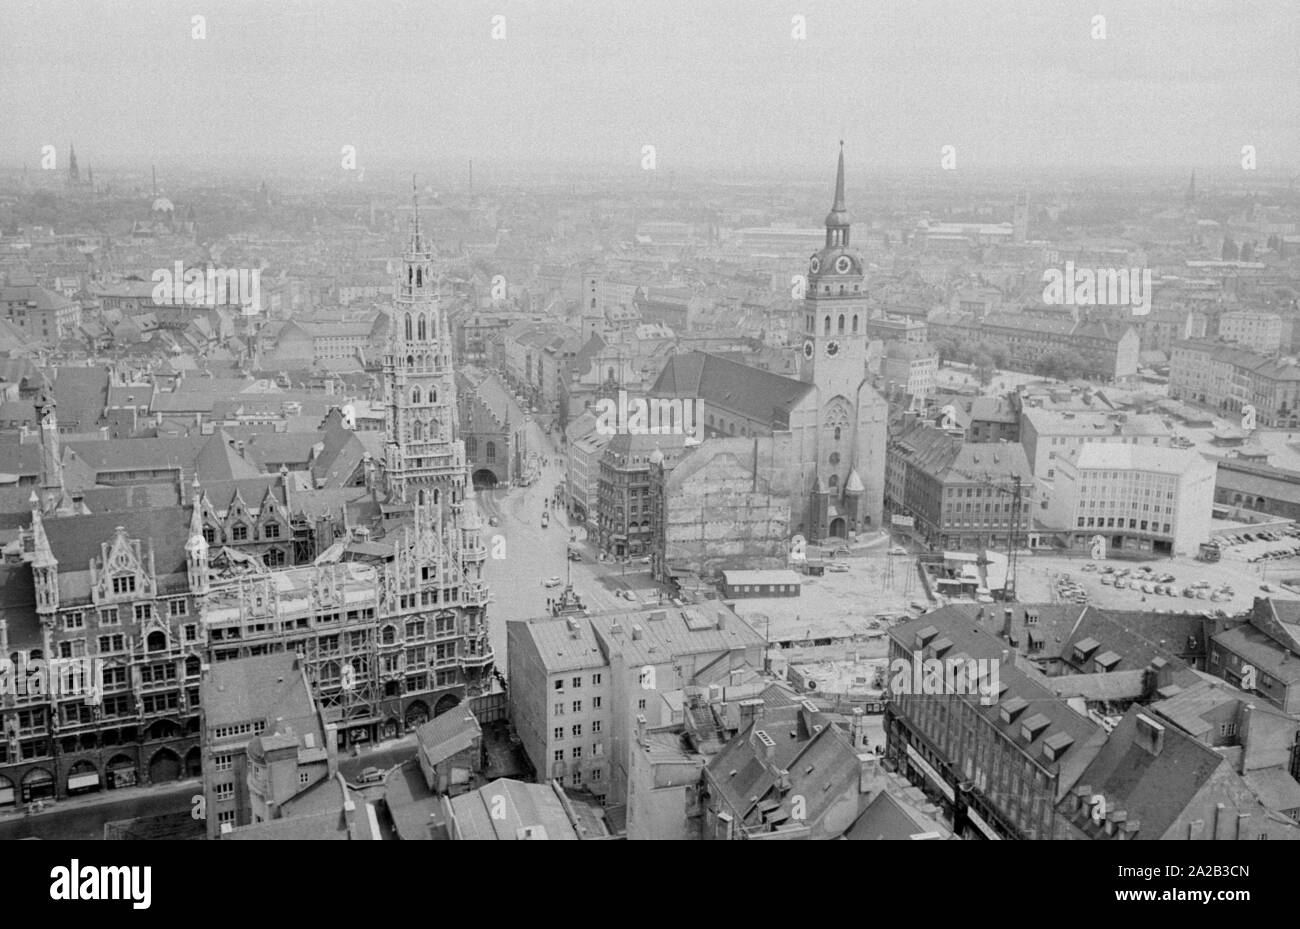 View of the old town of Munich from one of the windows of the southern tower of the Munich Frauenkirche. This photo was probably taken on the inauguration day of the new elevator. Stock Photo